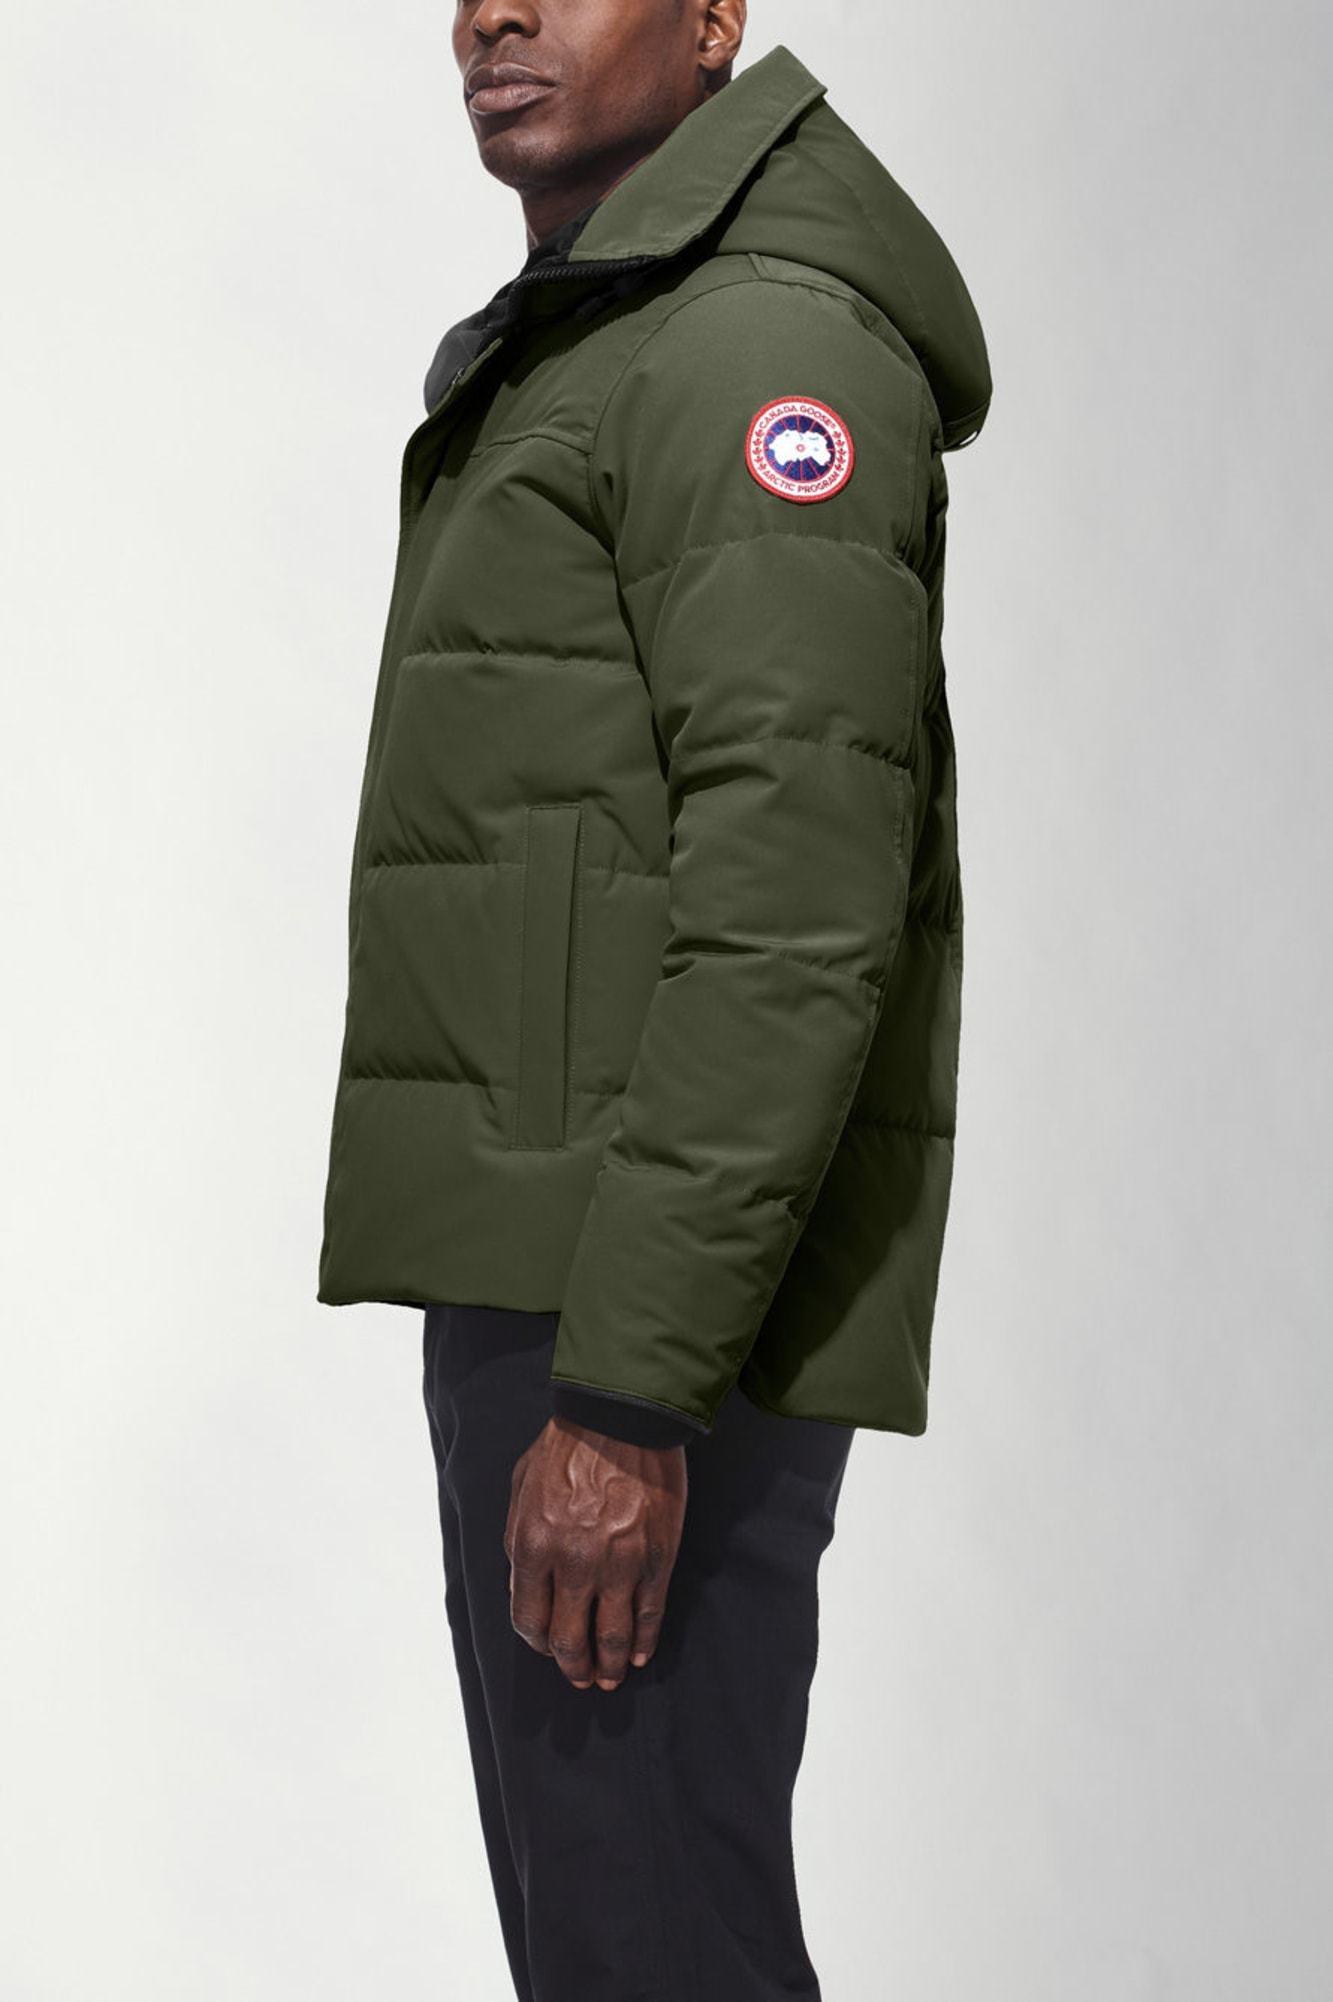 Canada Goose Jacket Military Green Greece, SAVE 40% - aveclumiere.com